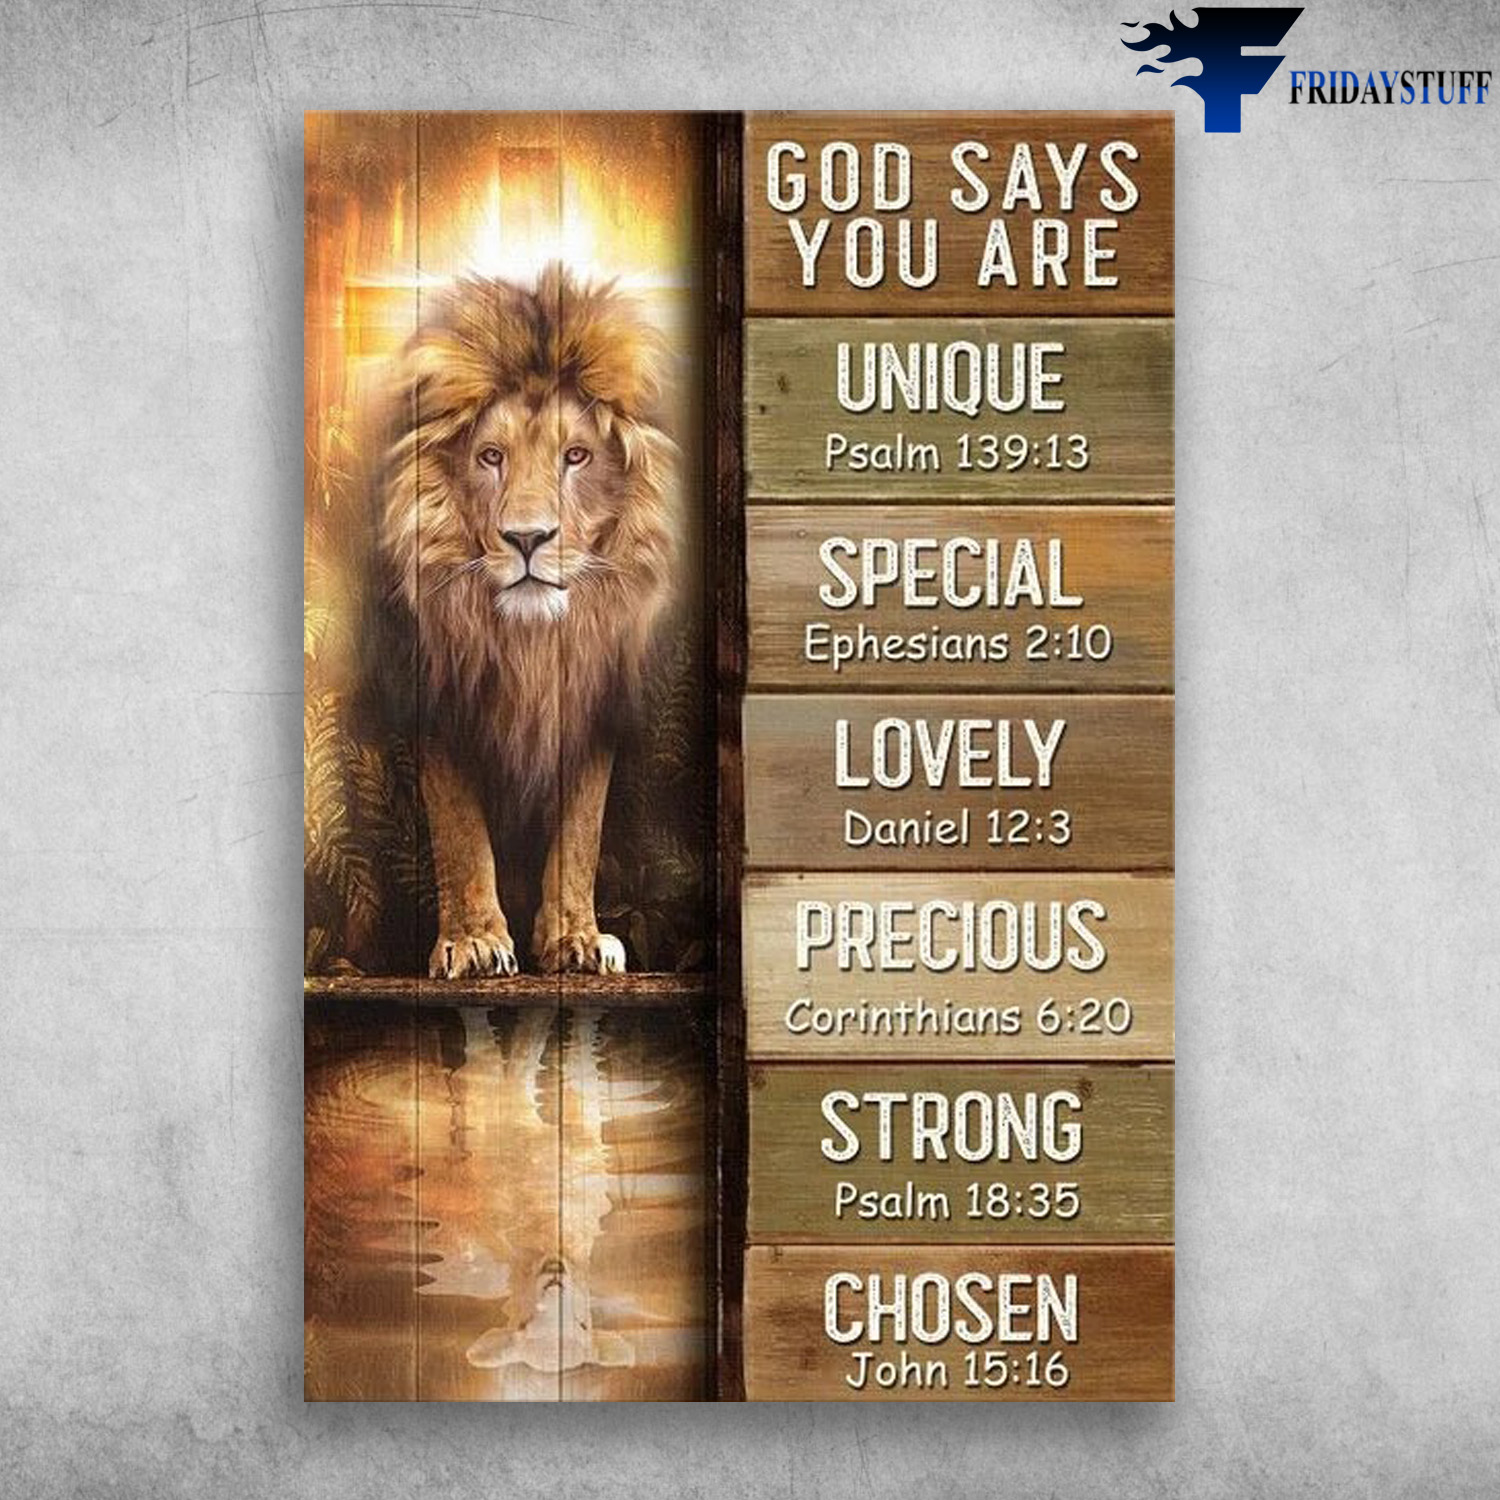 Lion God - Way Maker Miracle Worker, Promise Keeper Light In The Darkness,  My God That Is Who You Are - FridayStuff